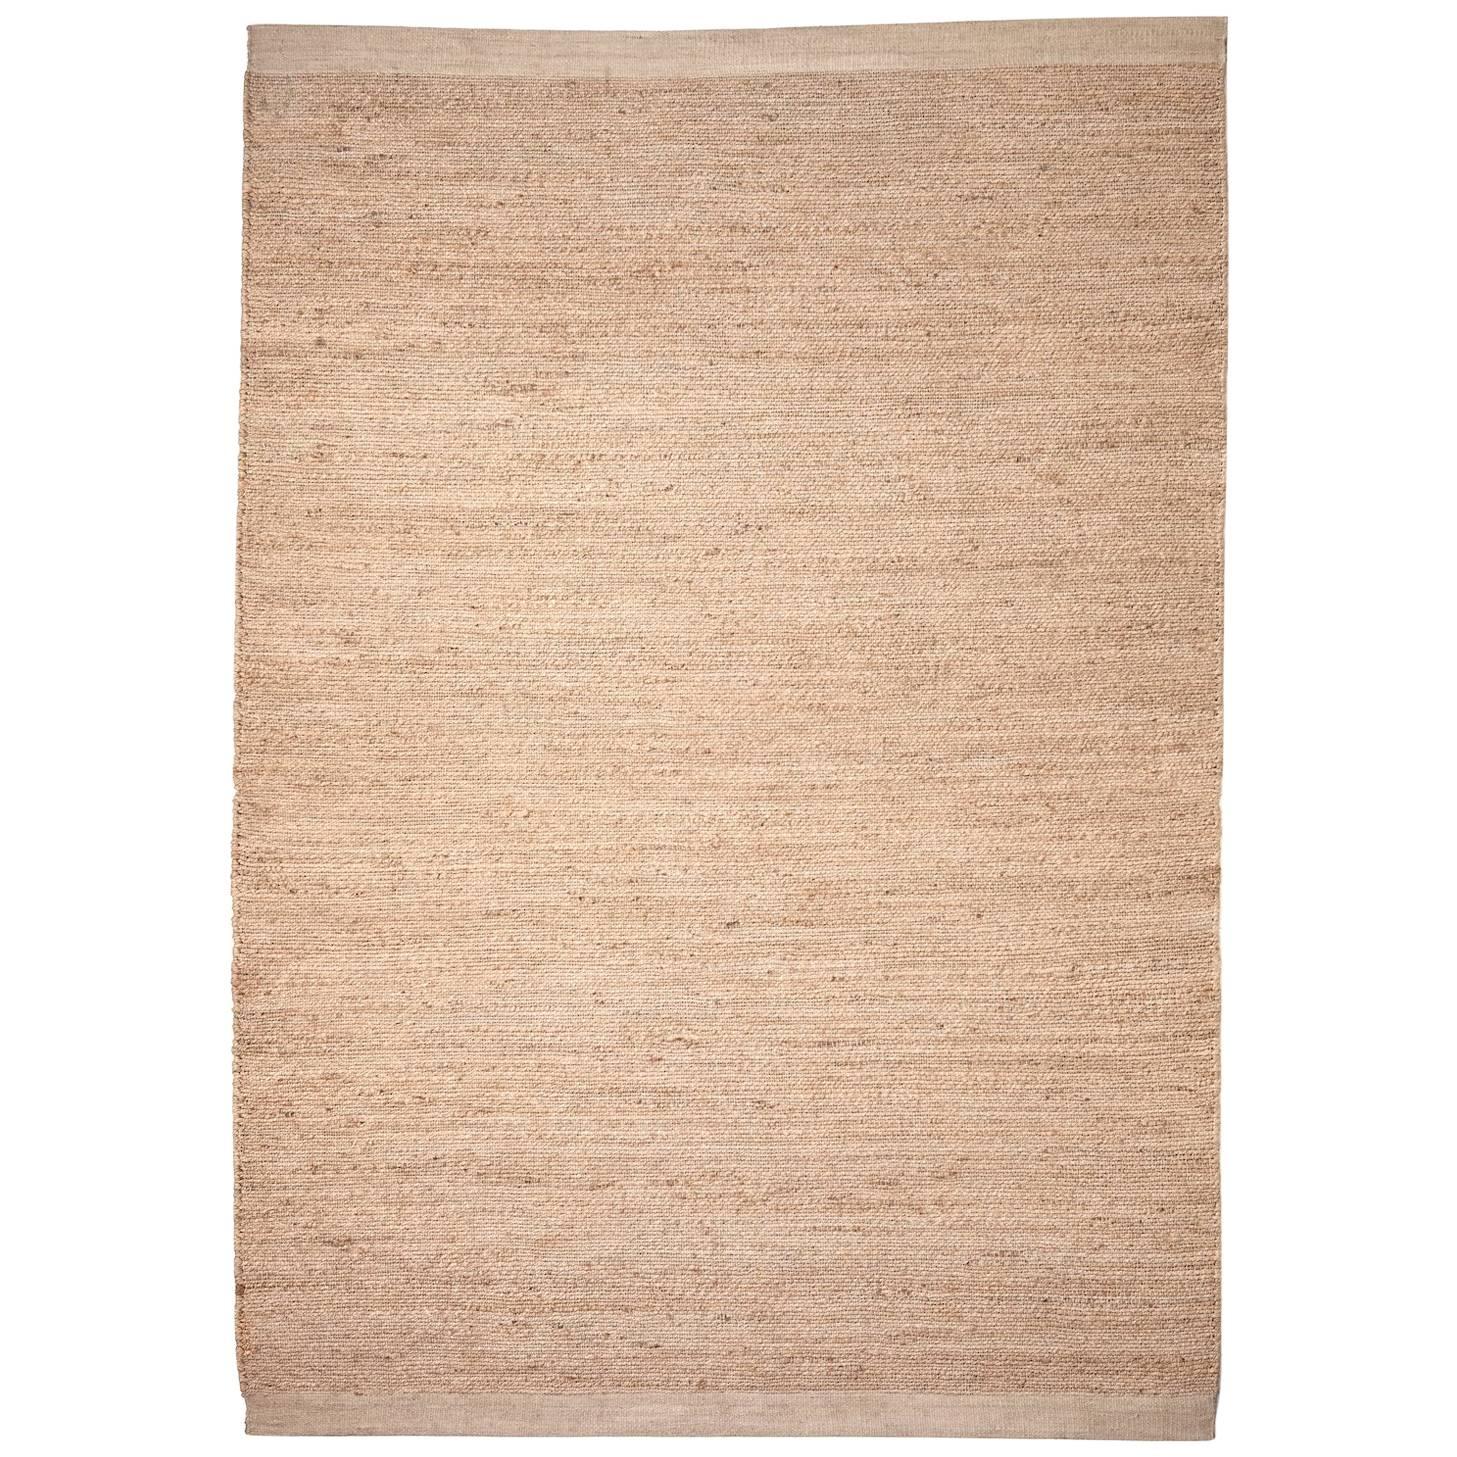 Hand-Loomed Herb Rug by Nani Marquina in Natural, Extra Large